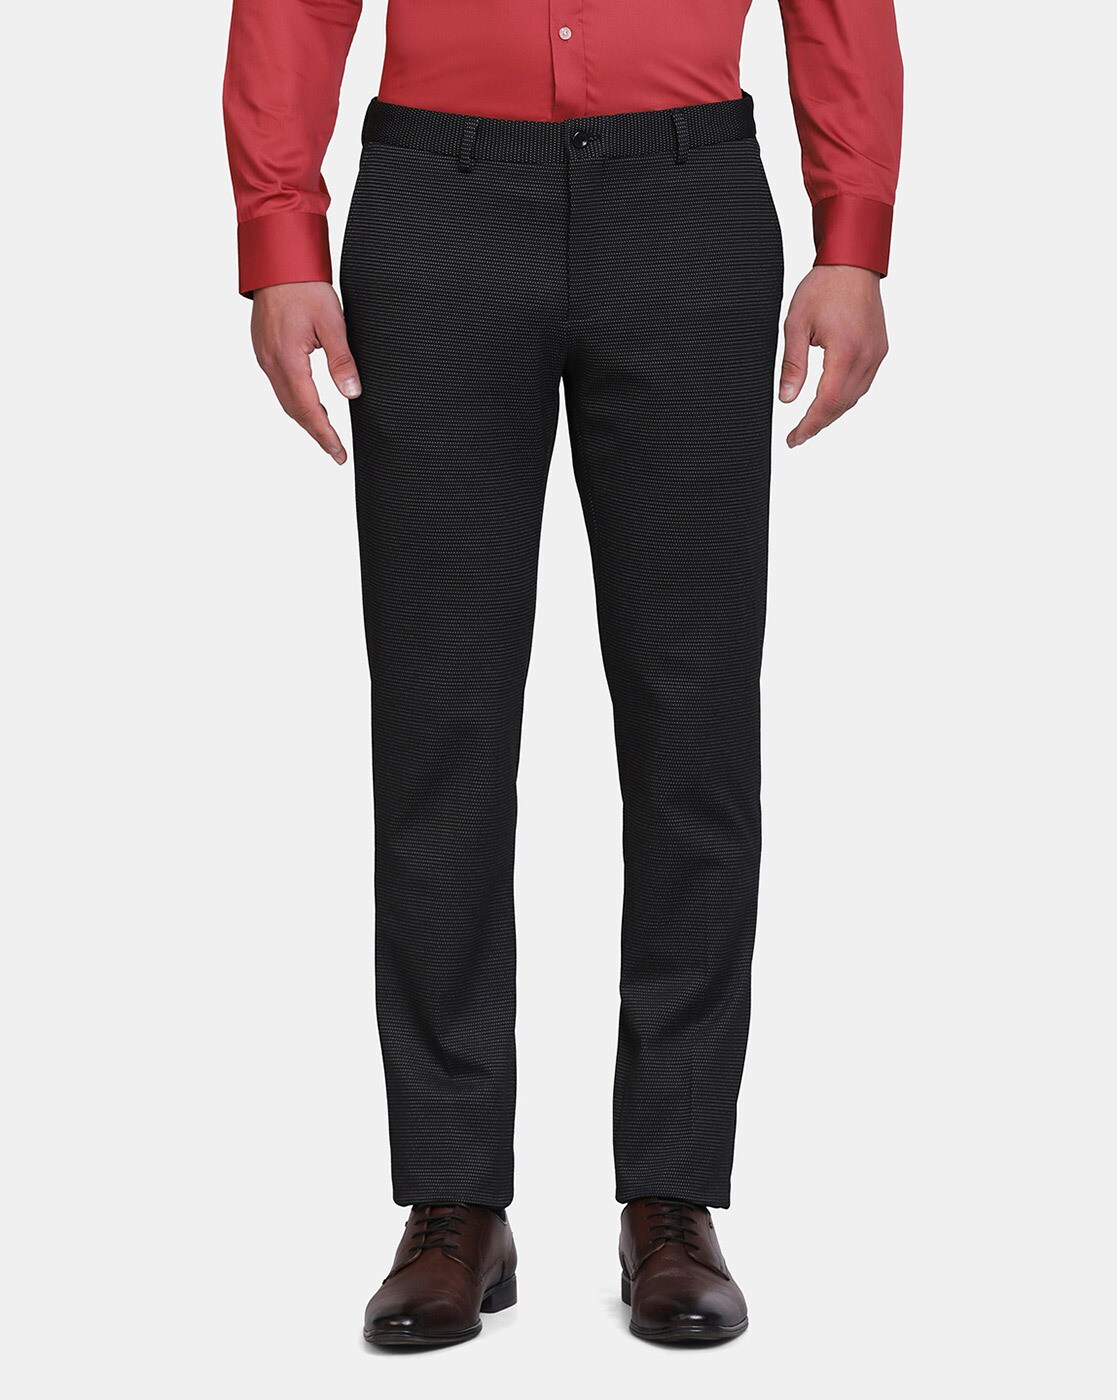 Check chino trousers COLOUR anthracite - RESERVED - 7232H-86P